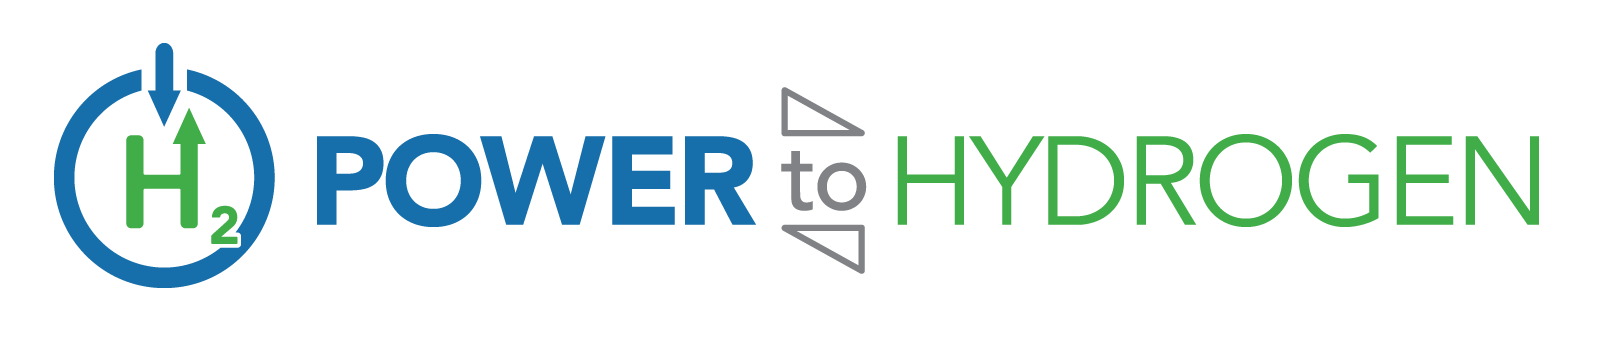 P2H2 Logo with green H2.png